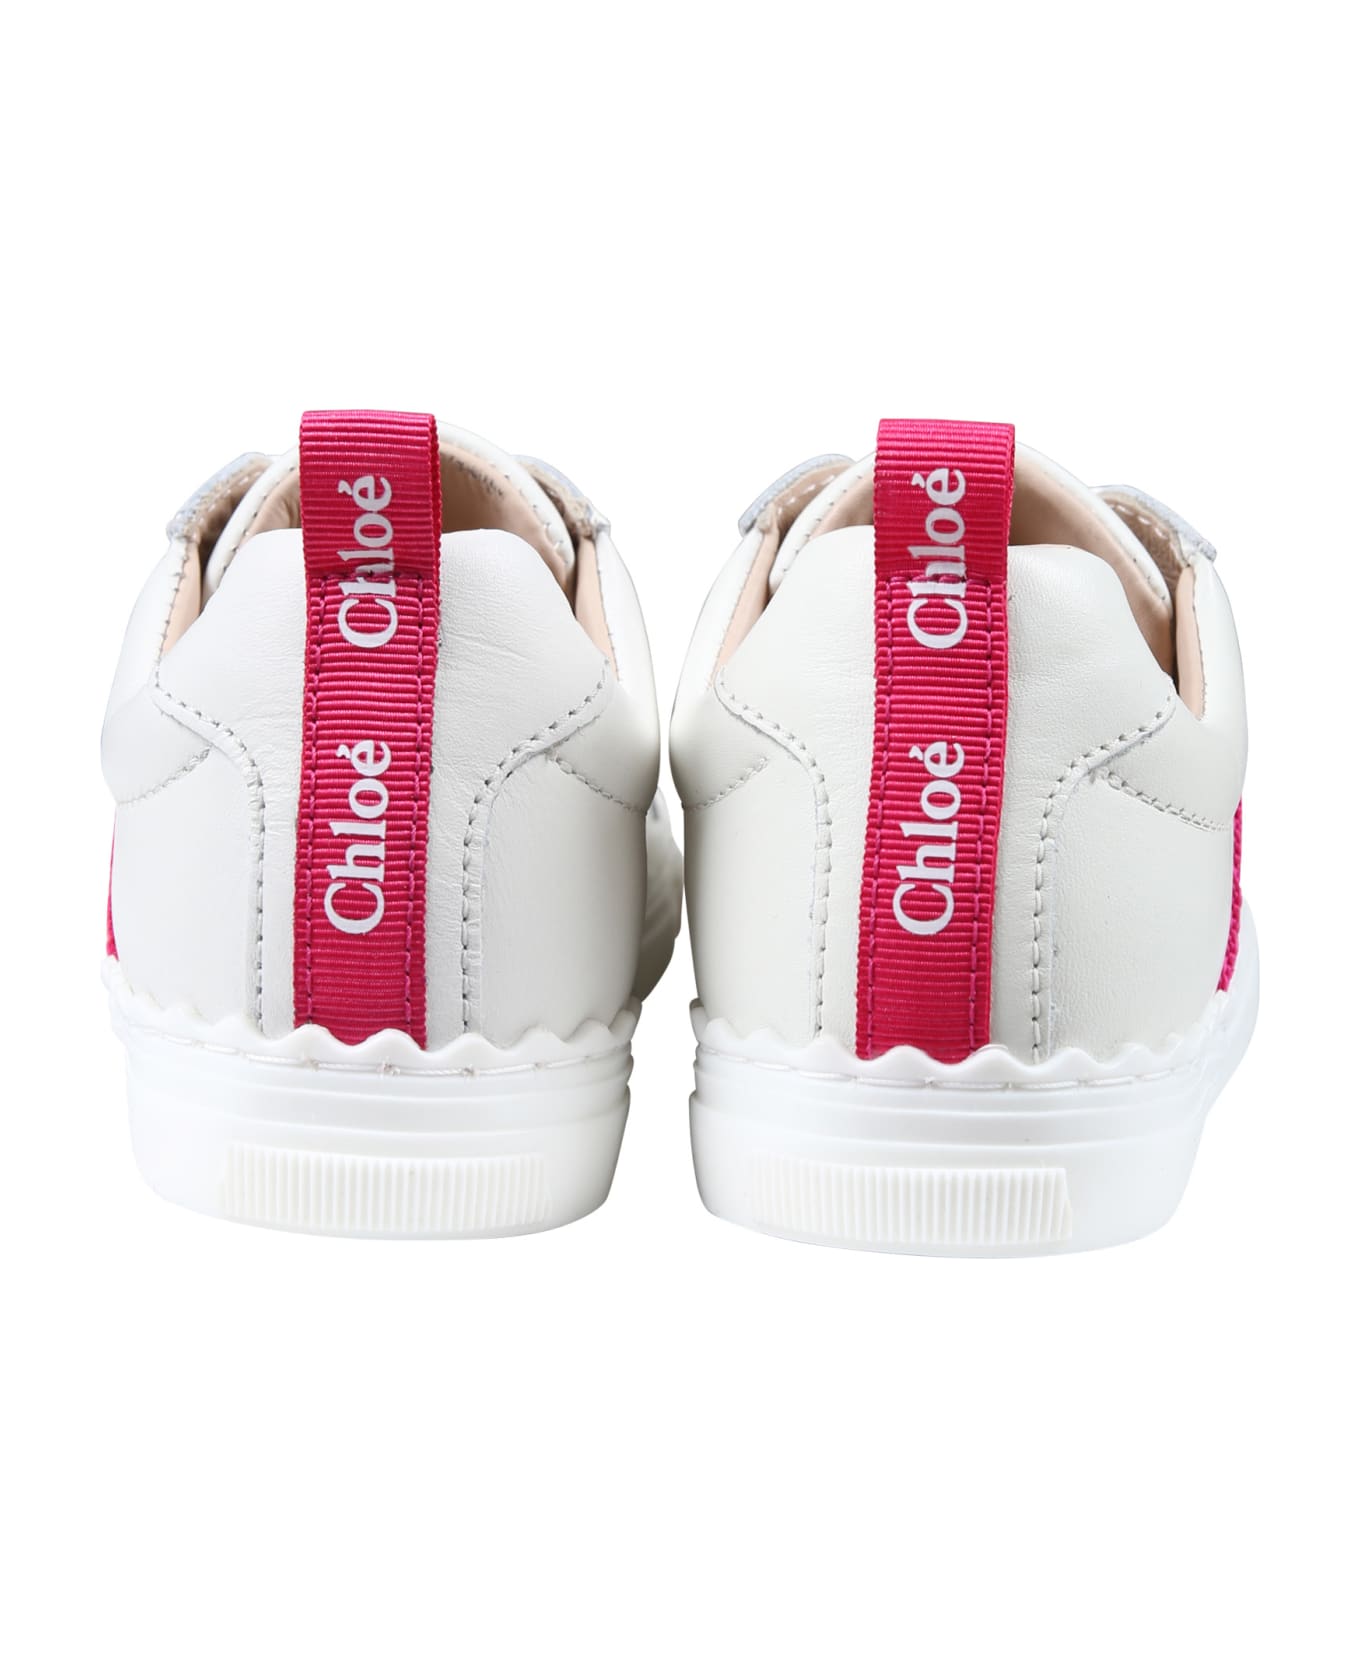 Chloé White Sneakers For Girls With Logo - White シューズ